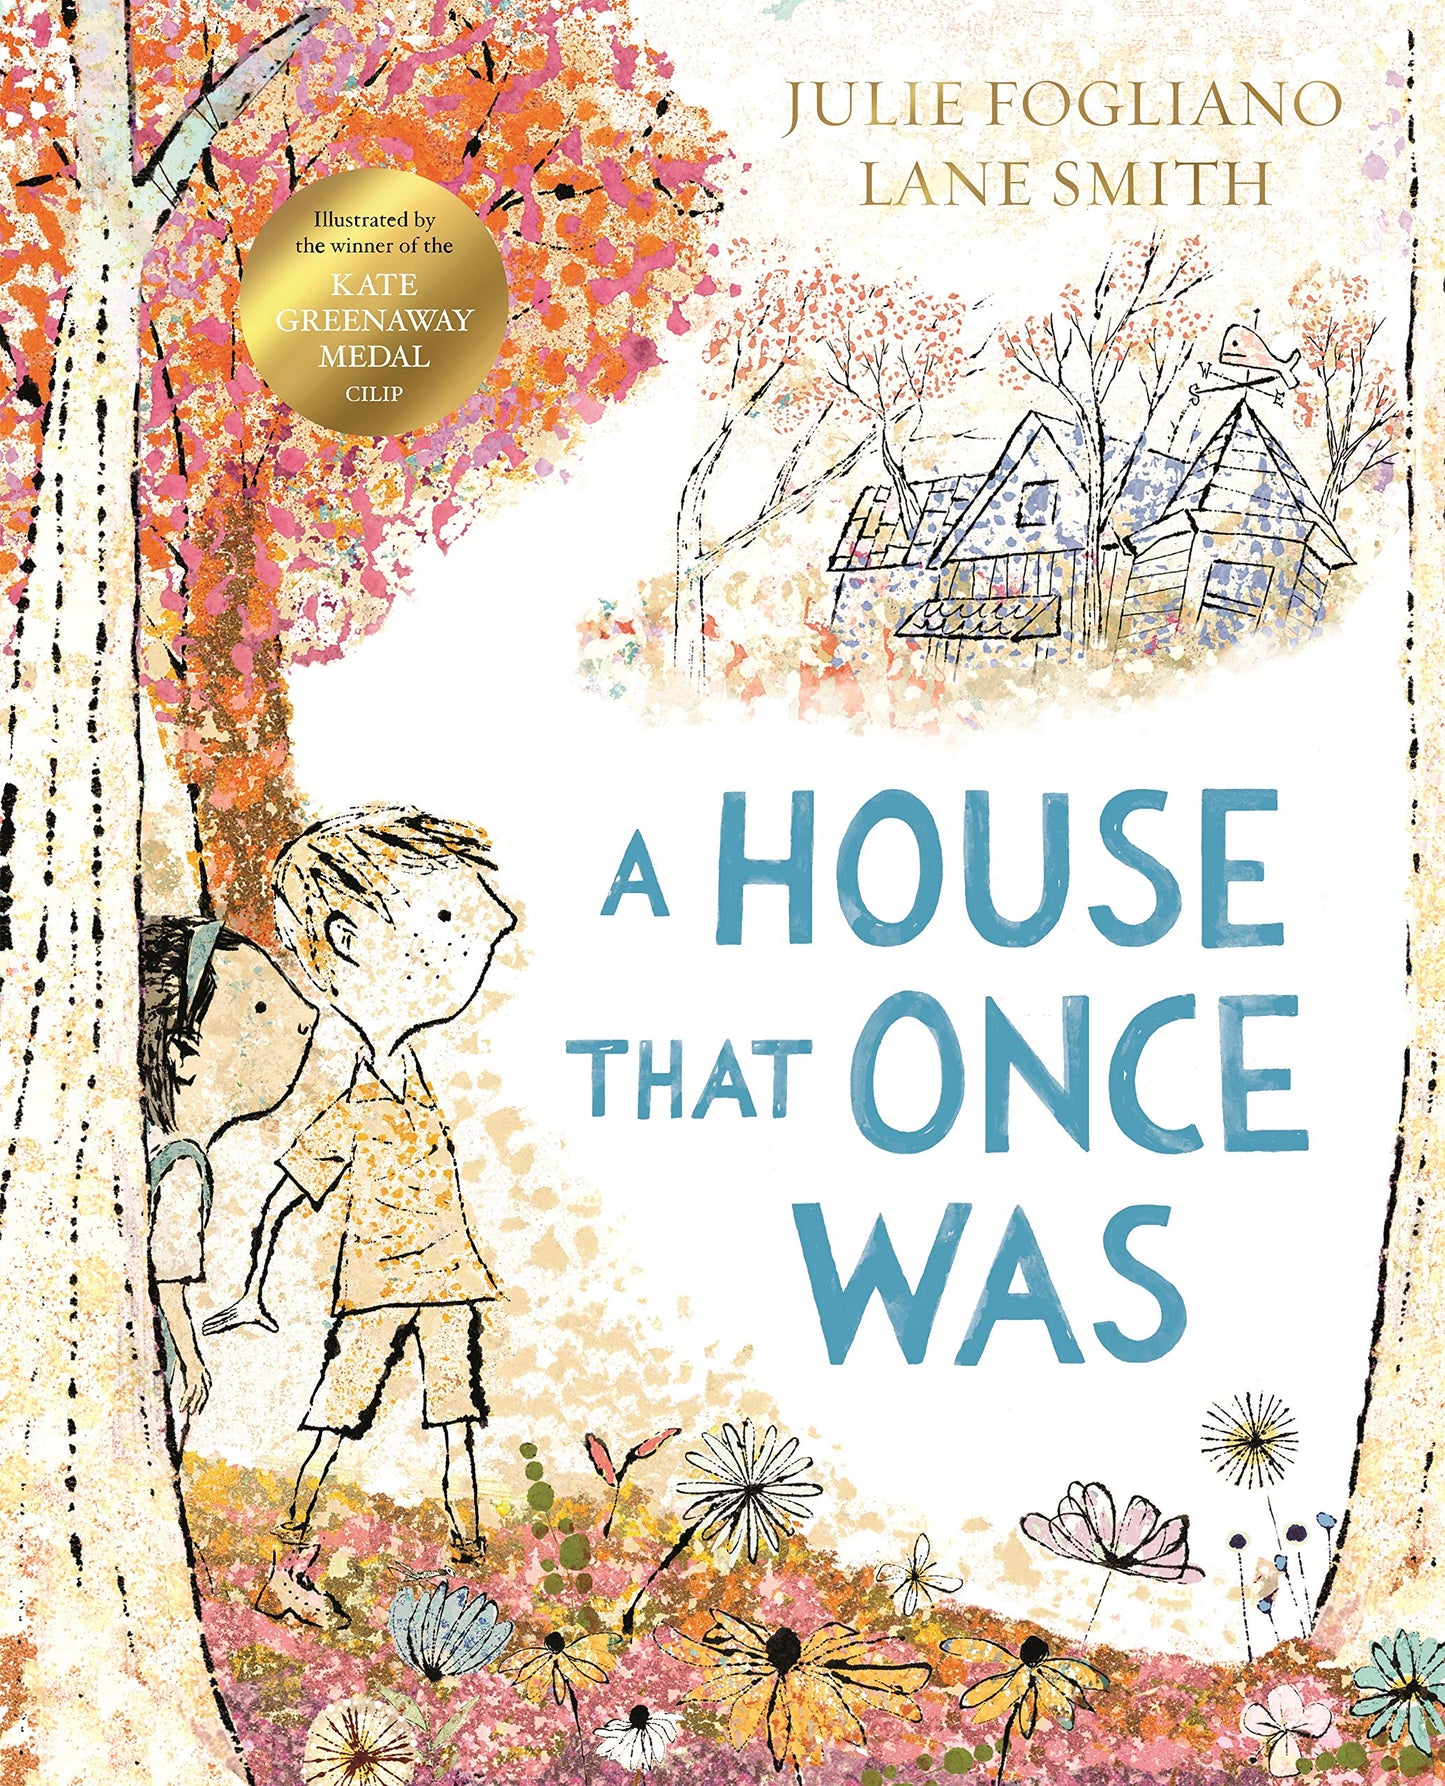 Book cover of A House that Once Was. Shows two children looking at an old house.